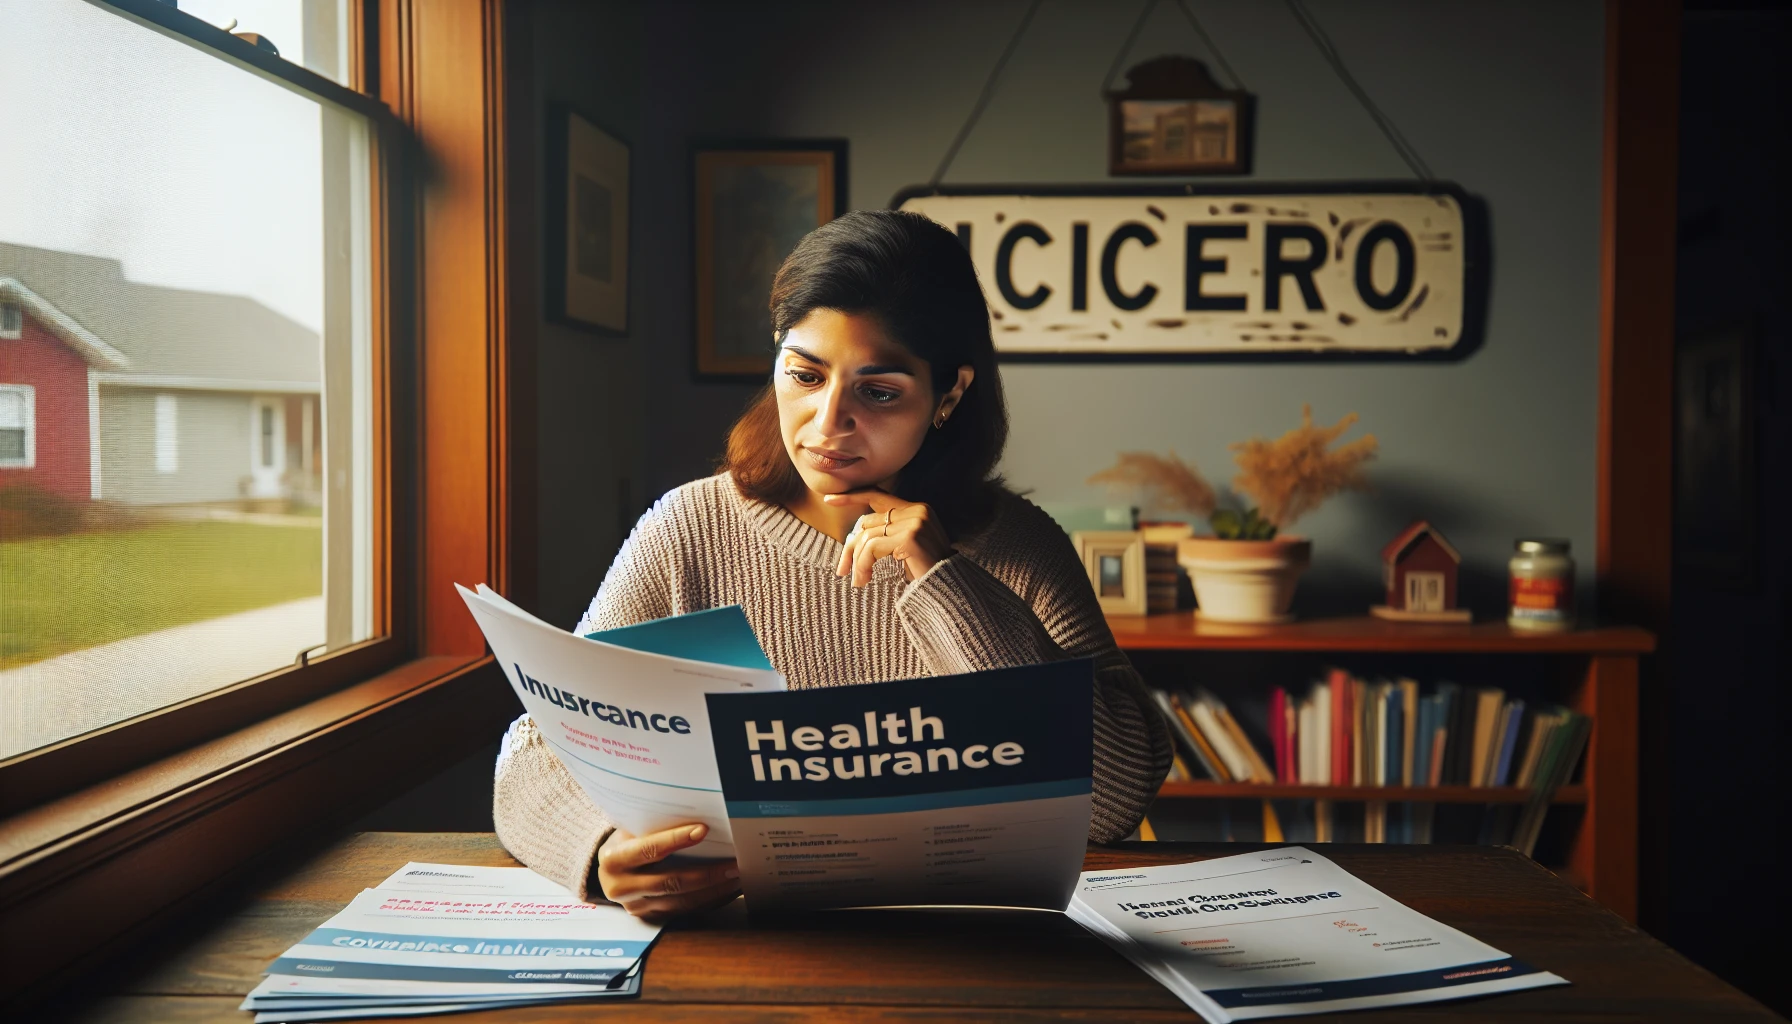 Illustration of a person evaluating health insurance plans in Cicero, IL